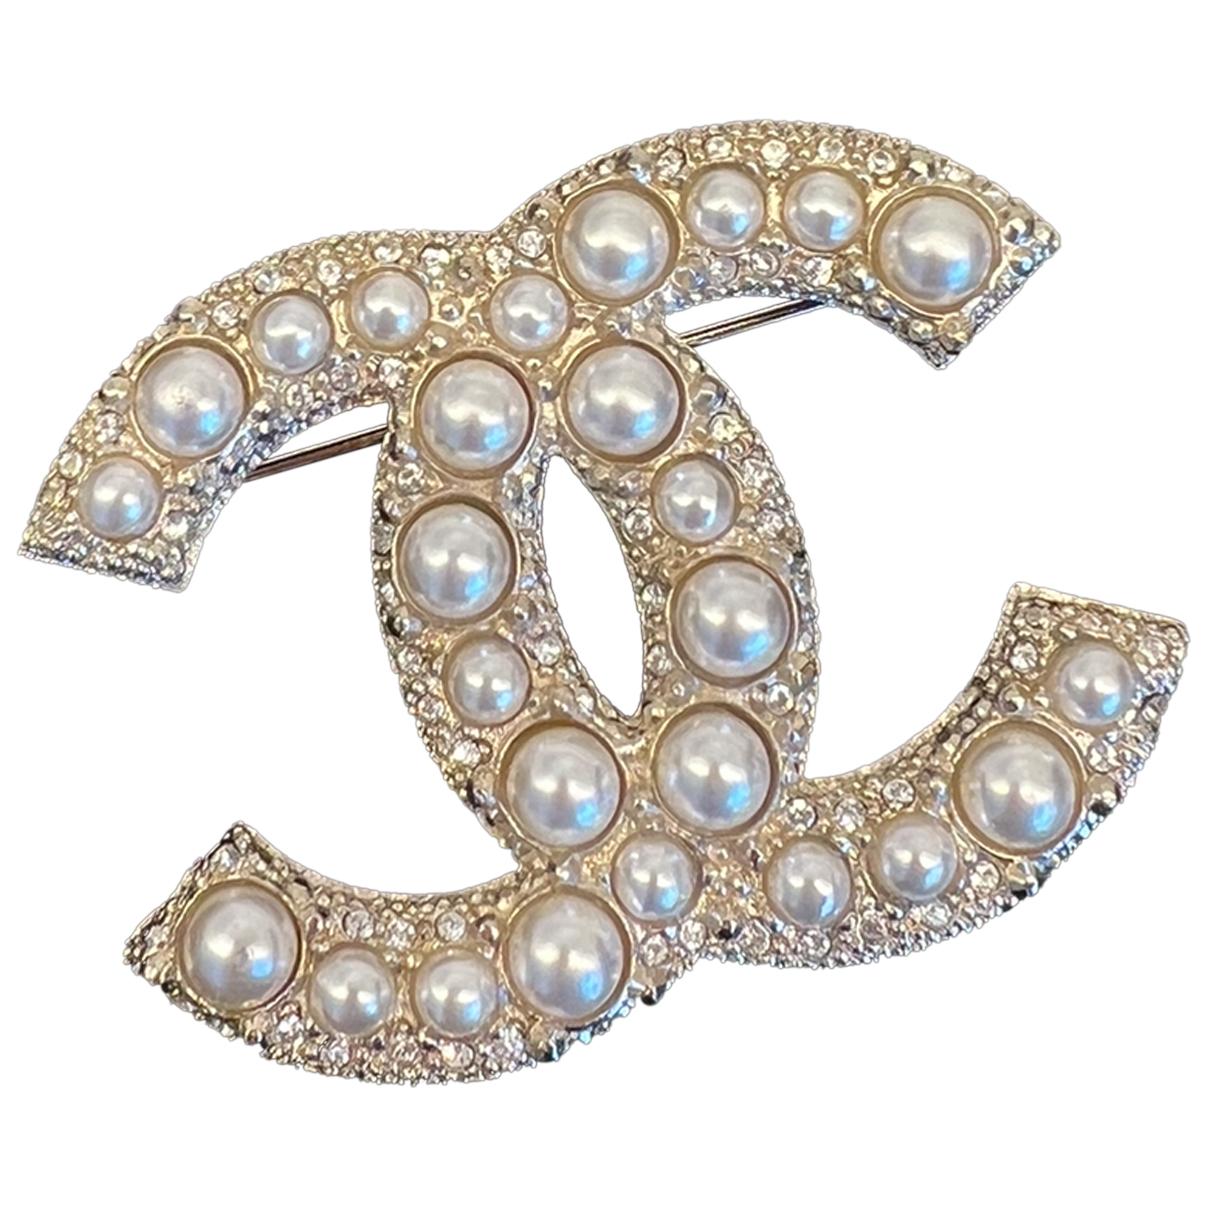 Get the best choiceChanel Pearl Pin Brooch, chanel brooch pins for